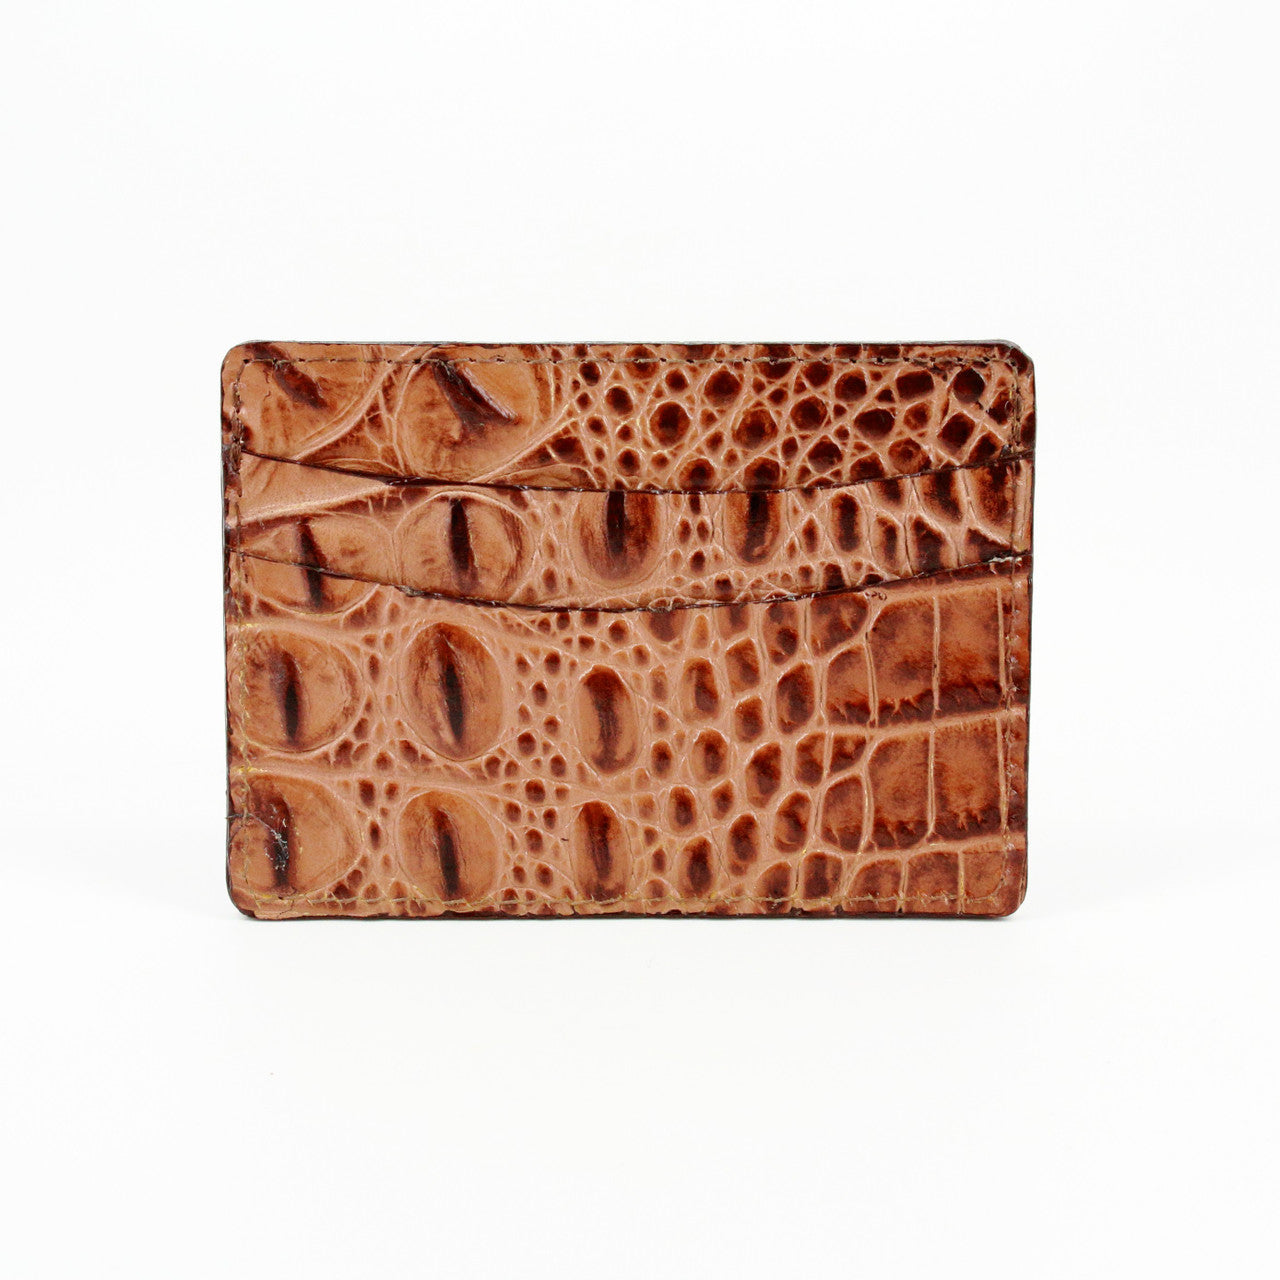 Italian Hornback Croc Embossed Calfskin Leather Card Case in Cognac by Torino Leather